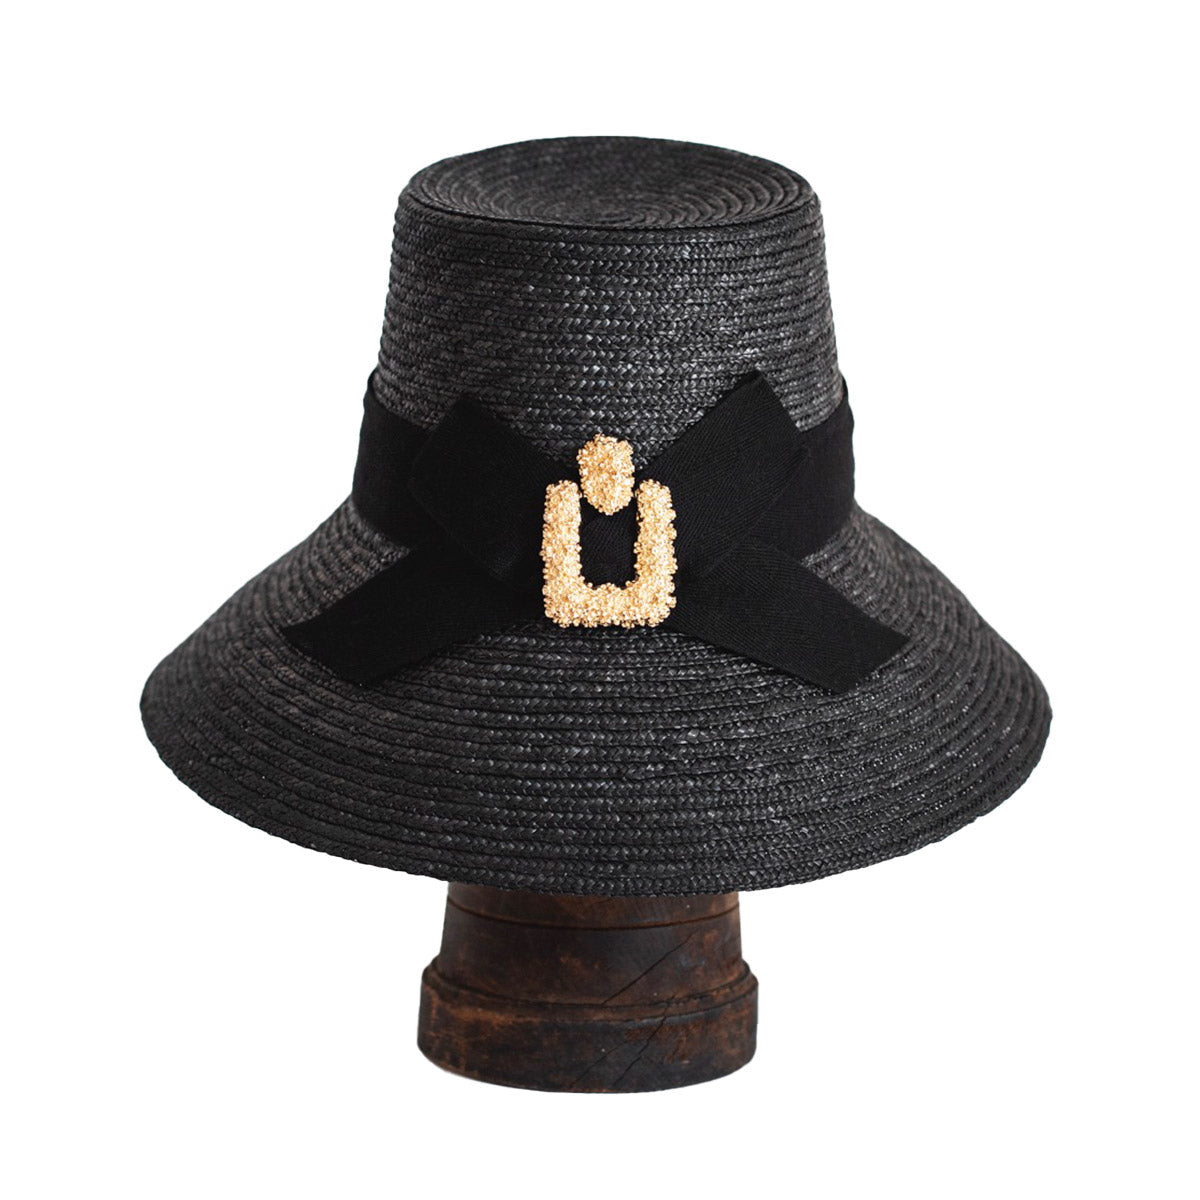 Sophisticated black straw hat CARRY